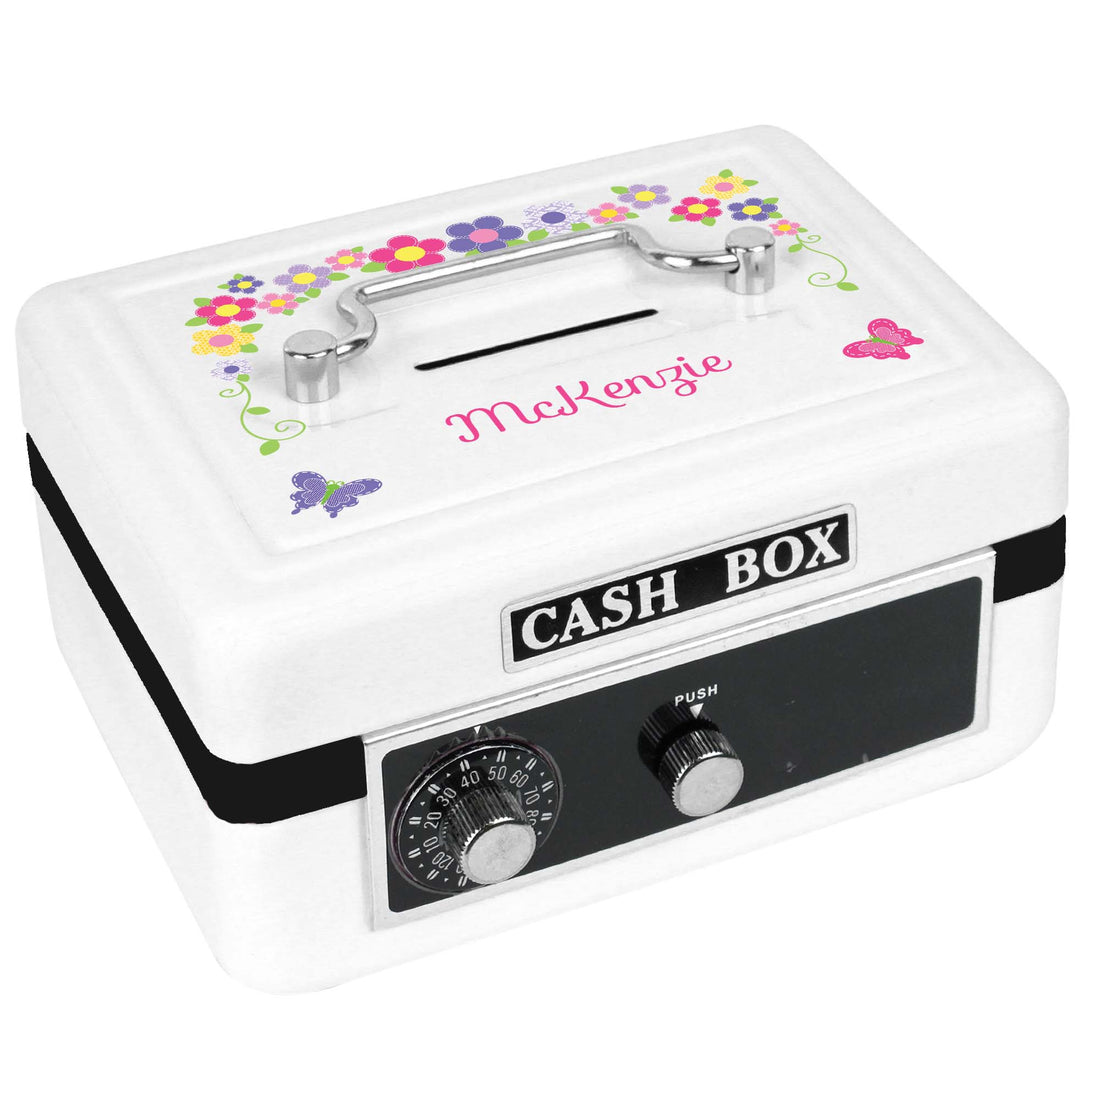 Personalized White Cash Box with Bright Butterflies Garland design